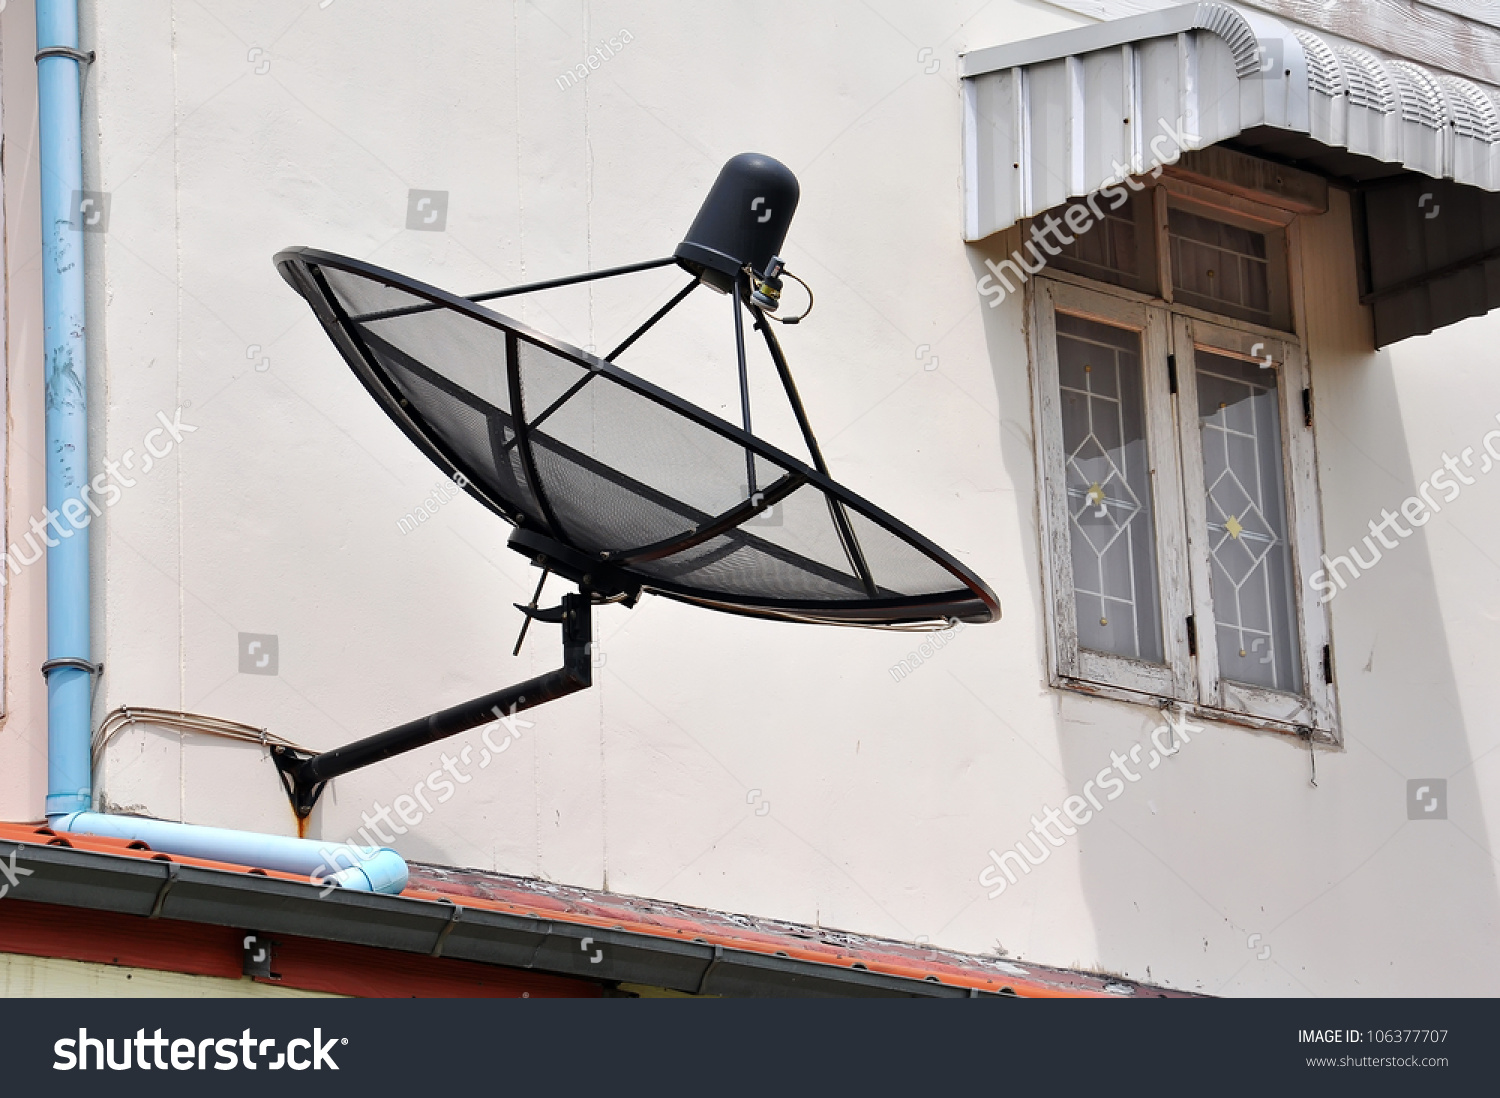 Satellite Dish Is Attached To The Wall Of The House Stock ...